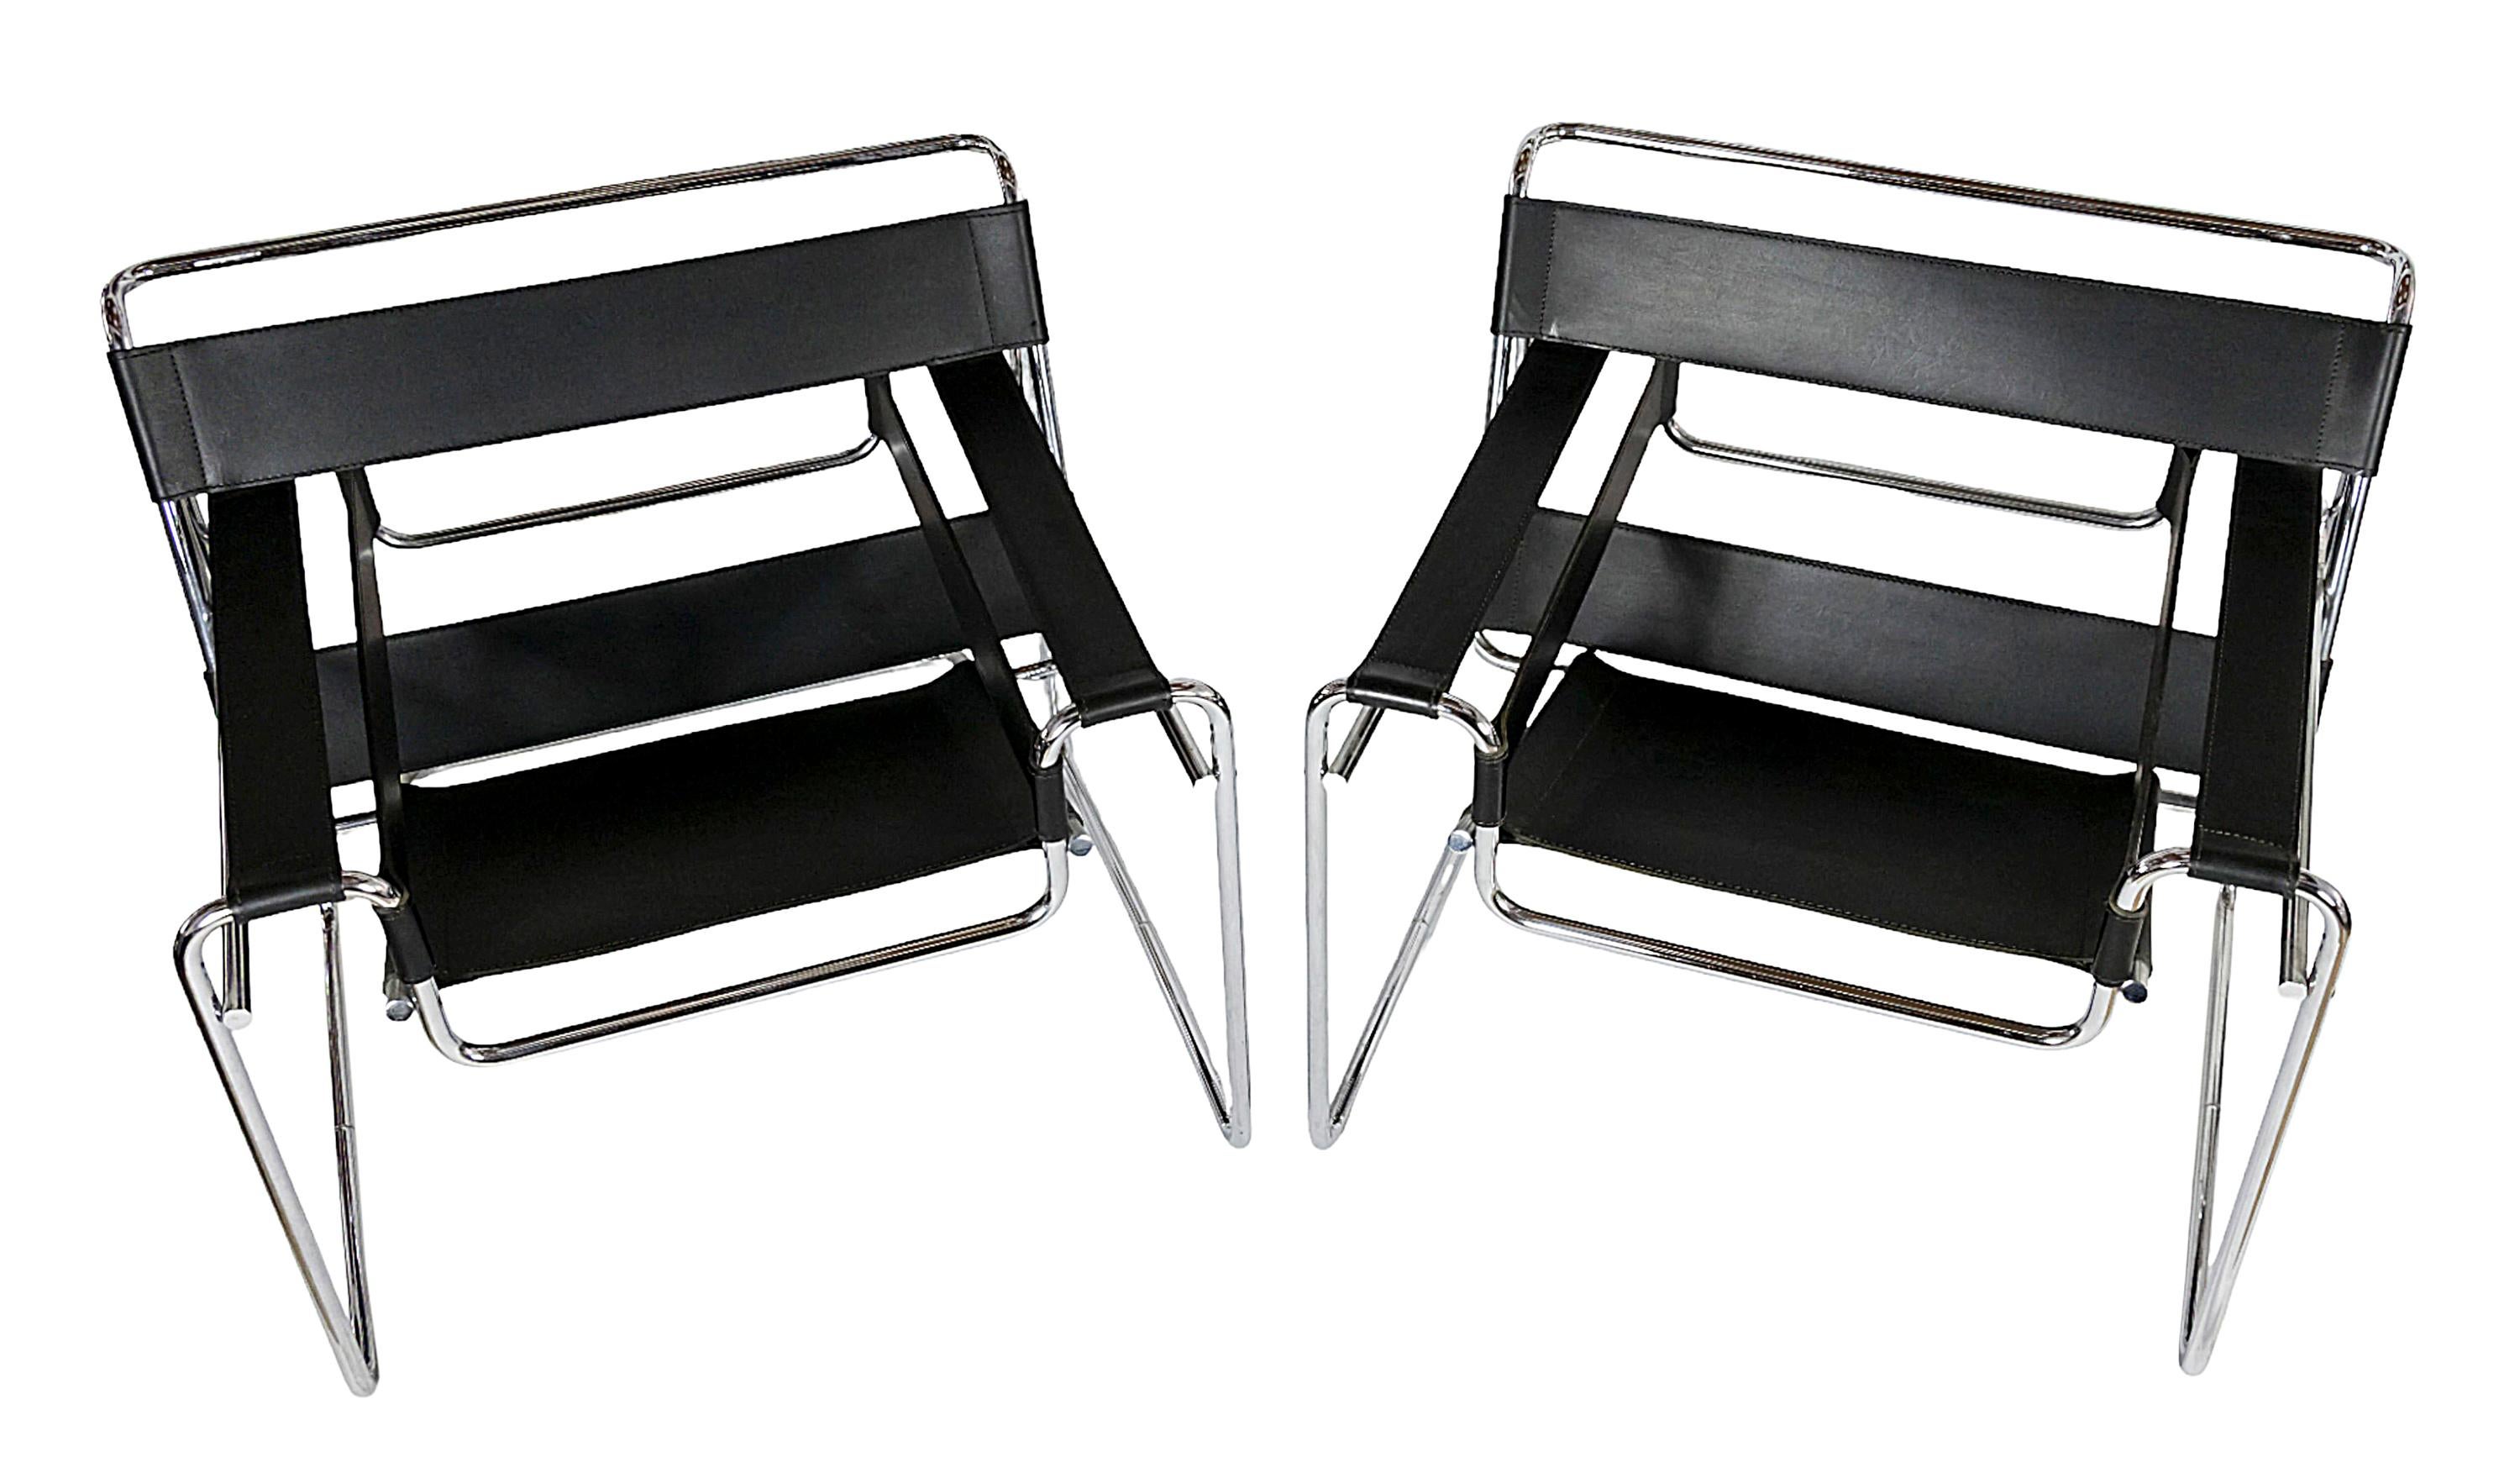 Pair of Wassily lounge chairs designed by Marcel Breuer, circa 1925.
Manufacture date 2003 by Knoll Studio.
Stamped Knoll Studio on the frame and labeled.
In black leather, chromed steel tube frame.
Very good vintage condition. Some scratches on the